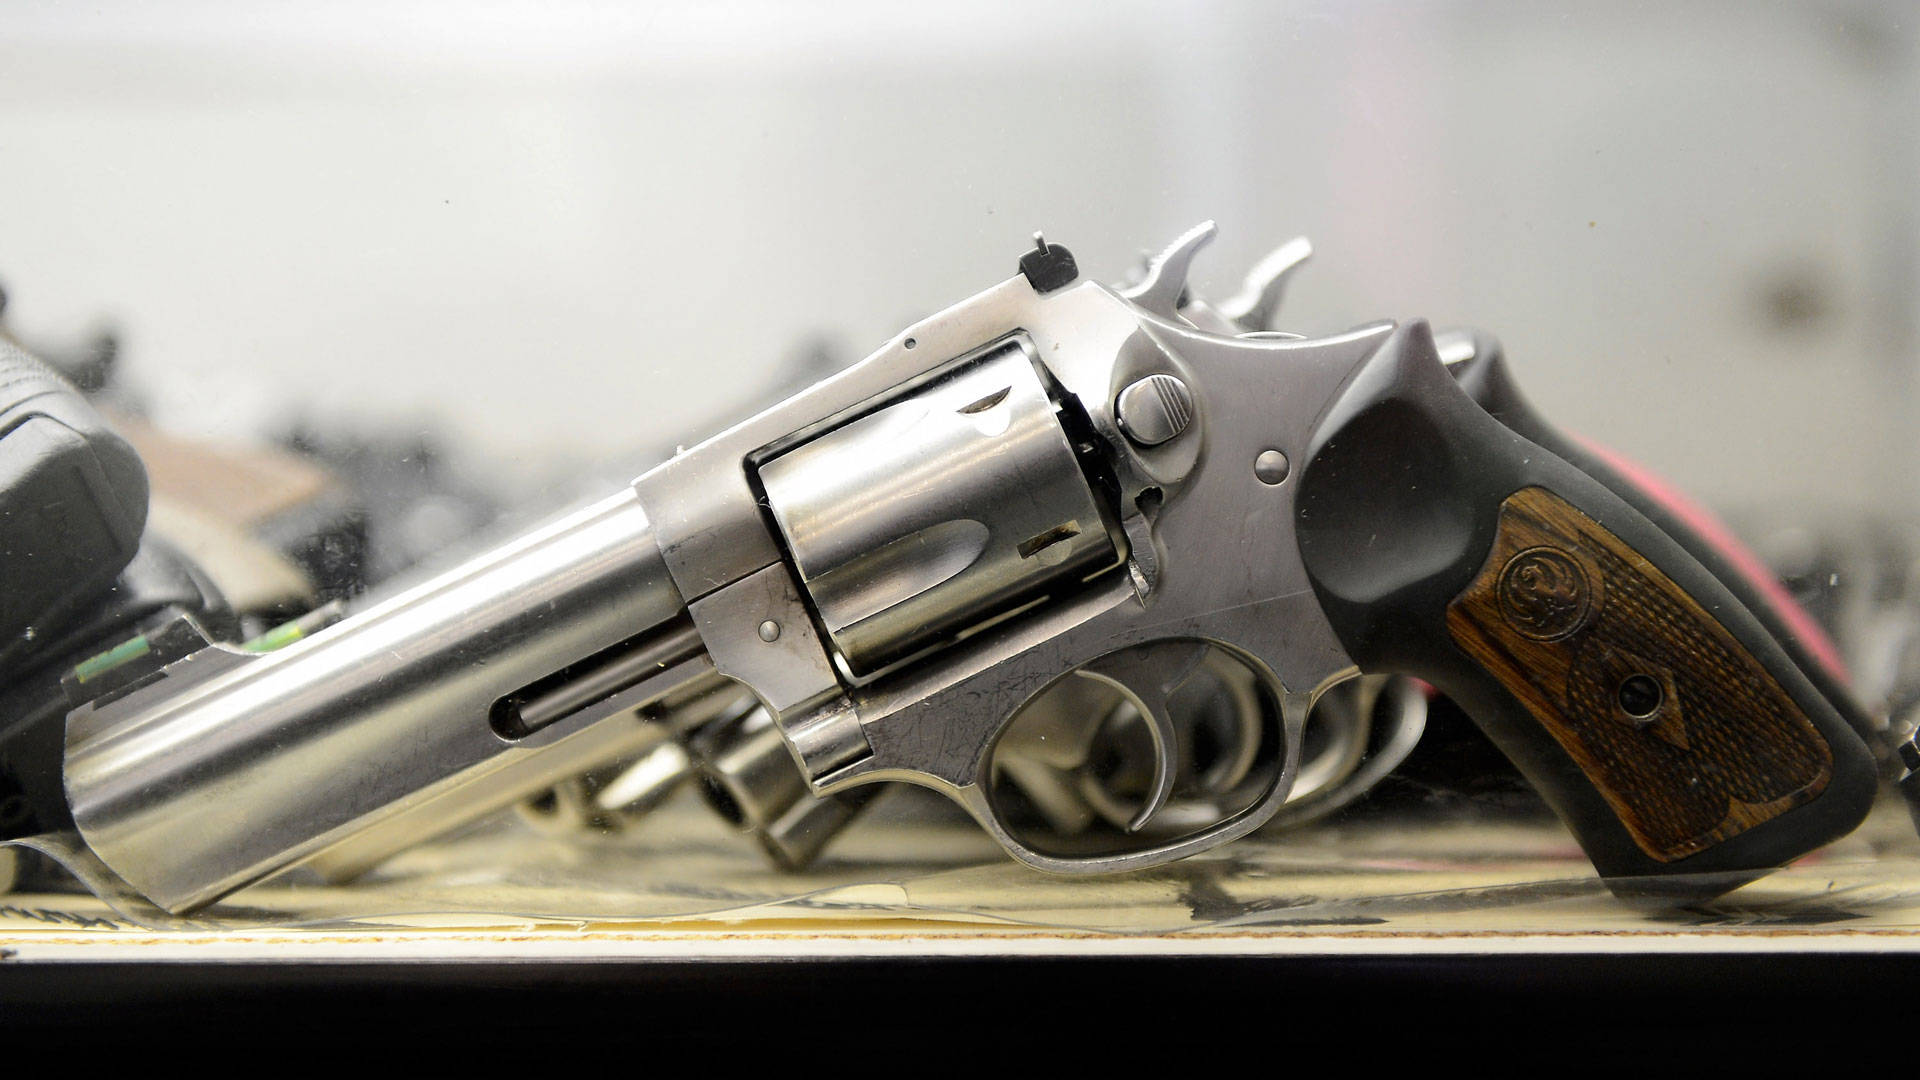 A .357 Magnum revolver on display at the Los Angeles Gun Club. Kevork Djansezian/Getty Images